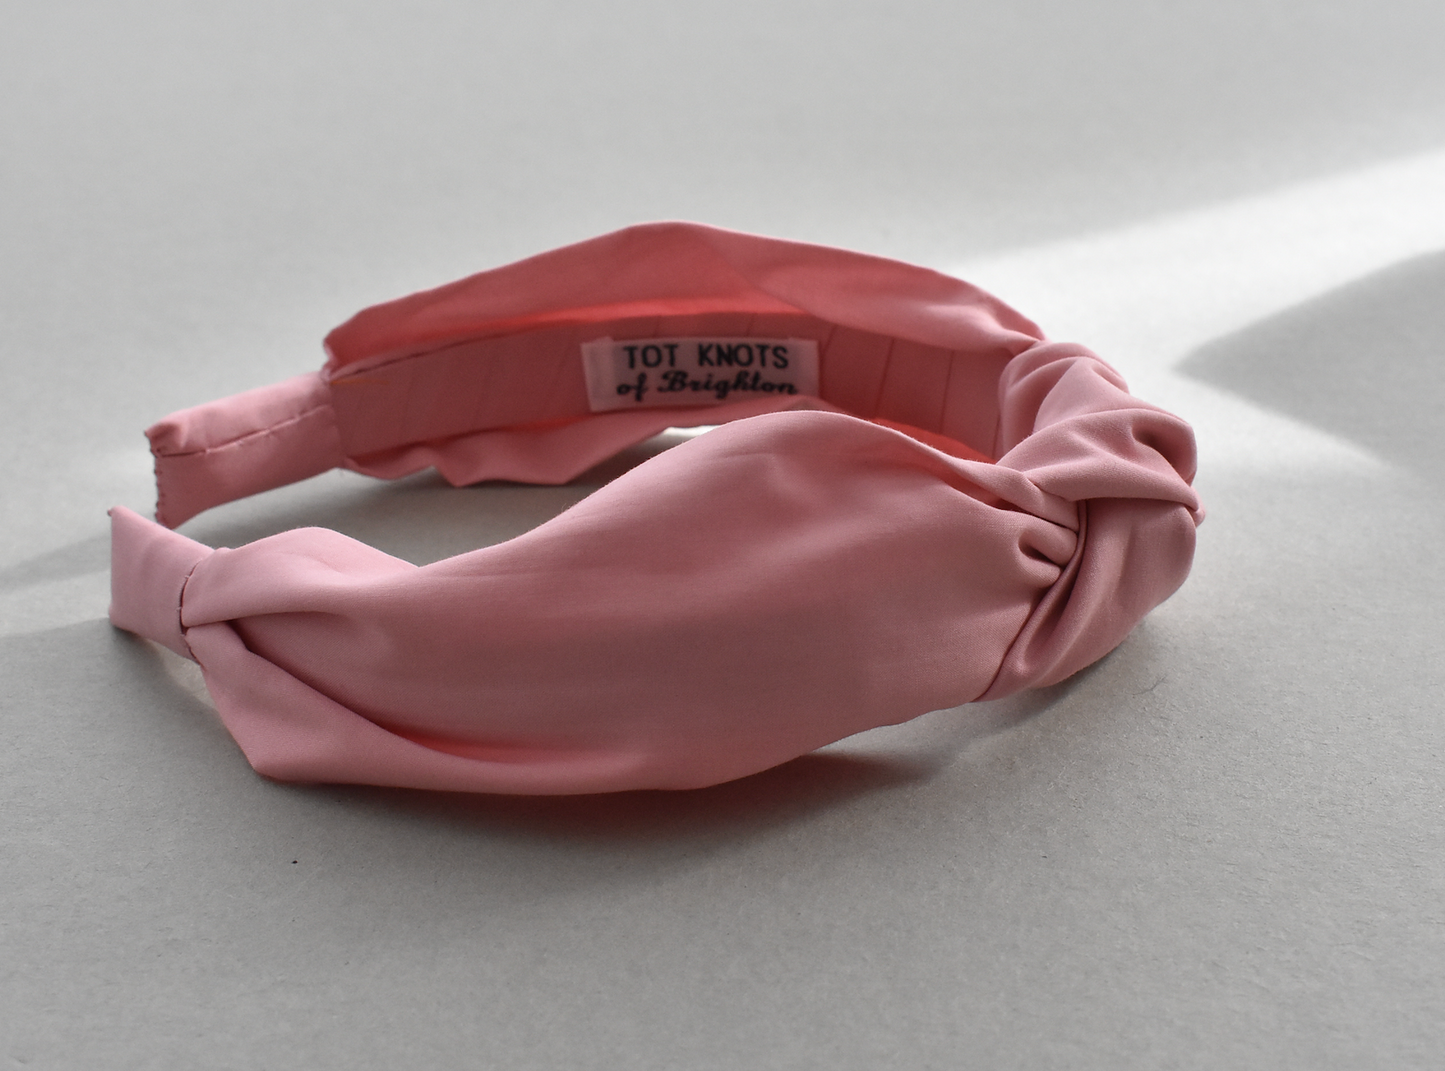 Kids Tot Knot Alice band - Liberty of London Dusty Pink